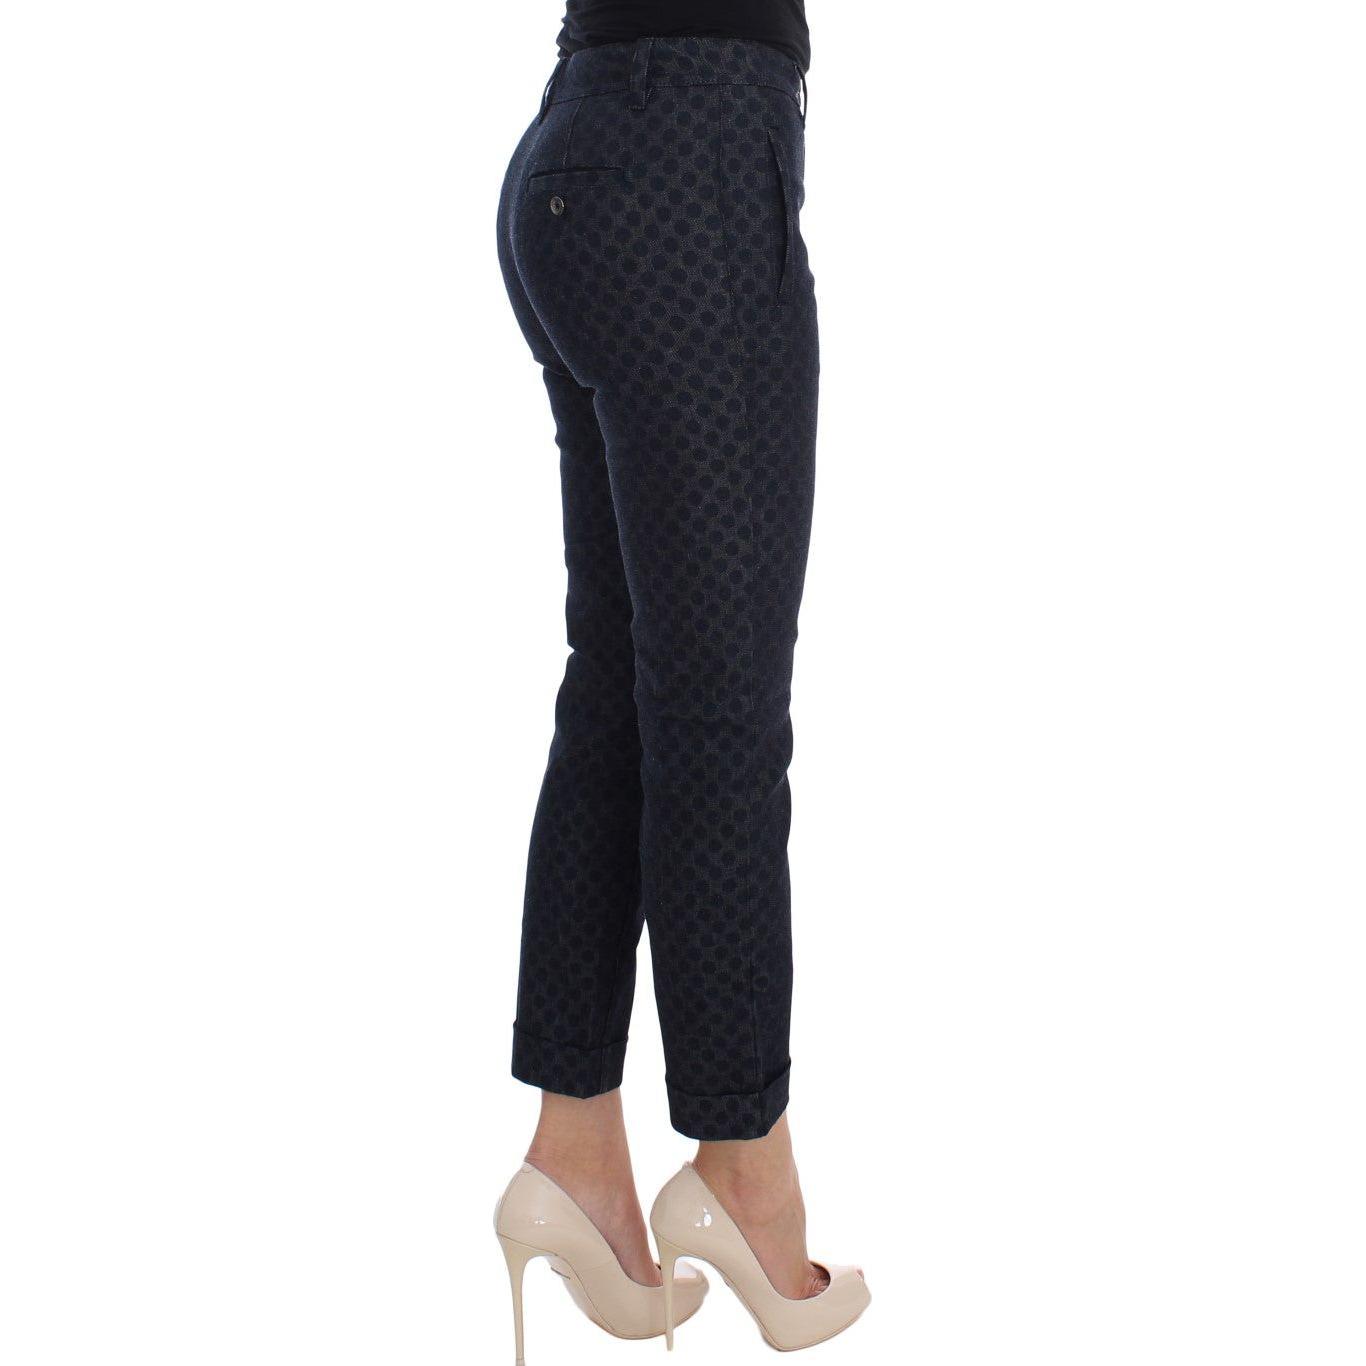 Dolce & Gabbana Chic Polka Dotted Capris Jeans polka-dotted-slim-capris-jeans